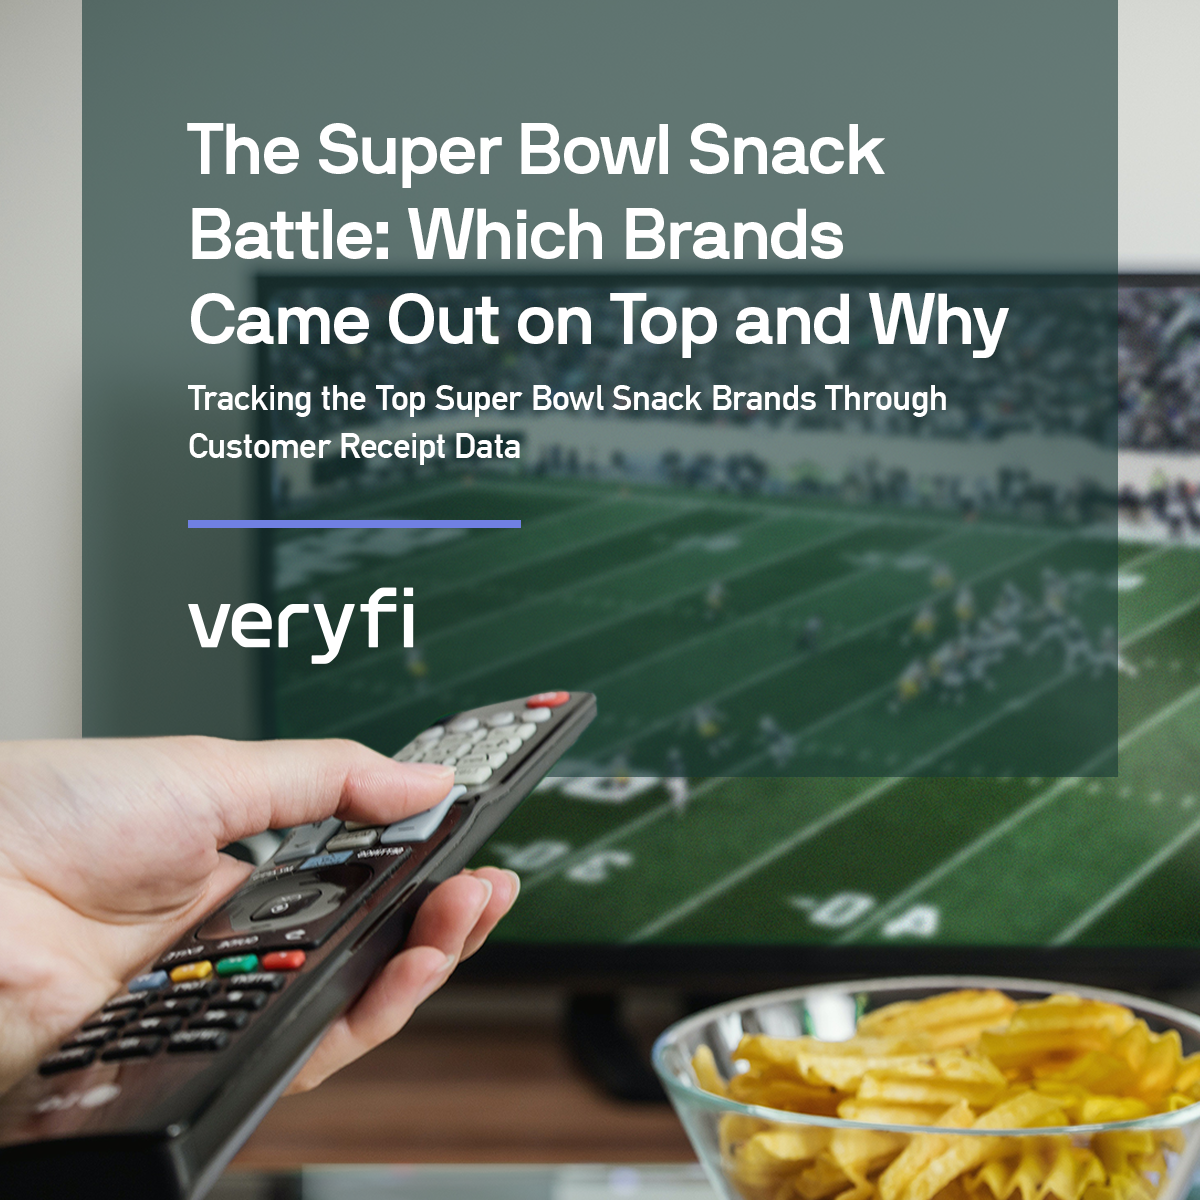 The Super Bowl Snack Battle: Which Brands Came Out on Top and Why